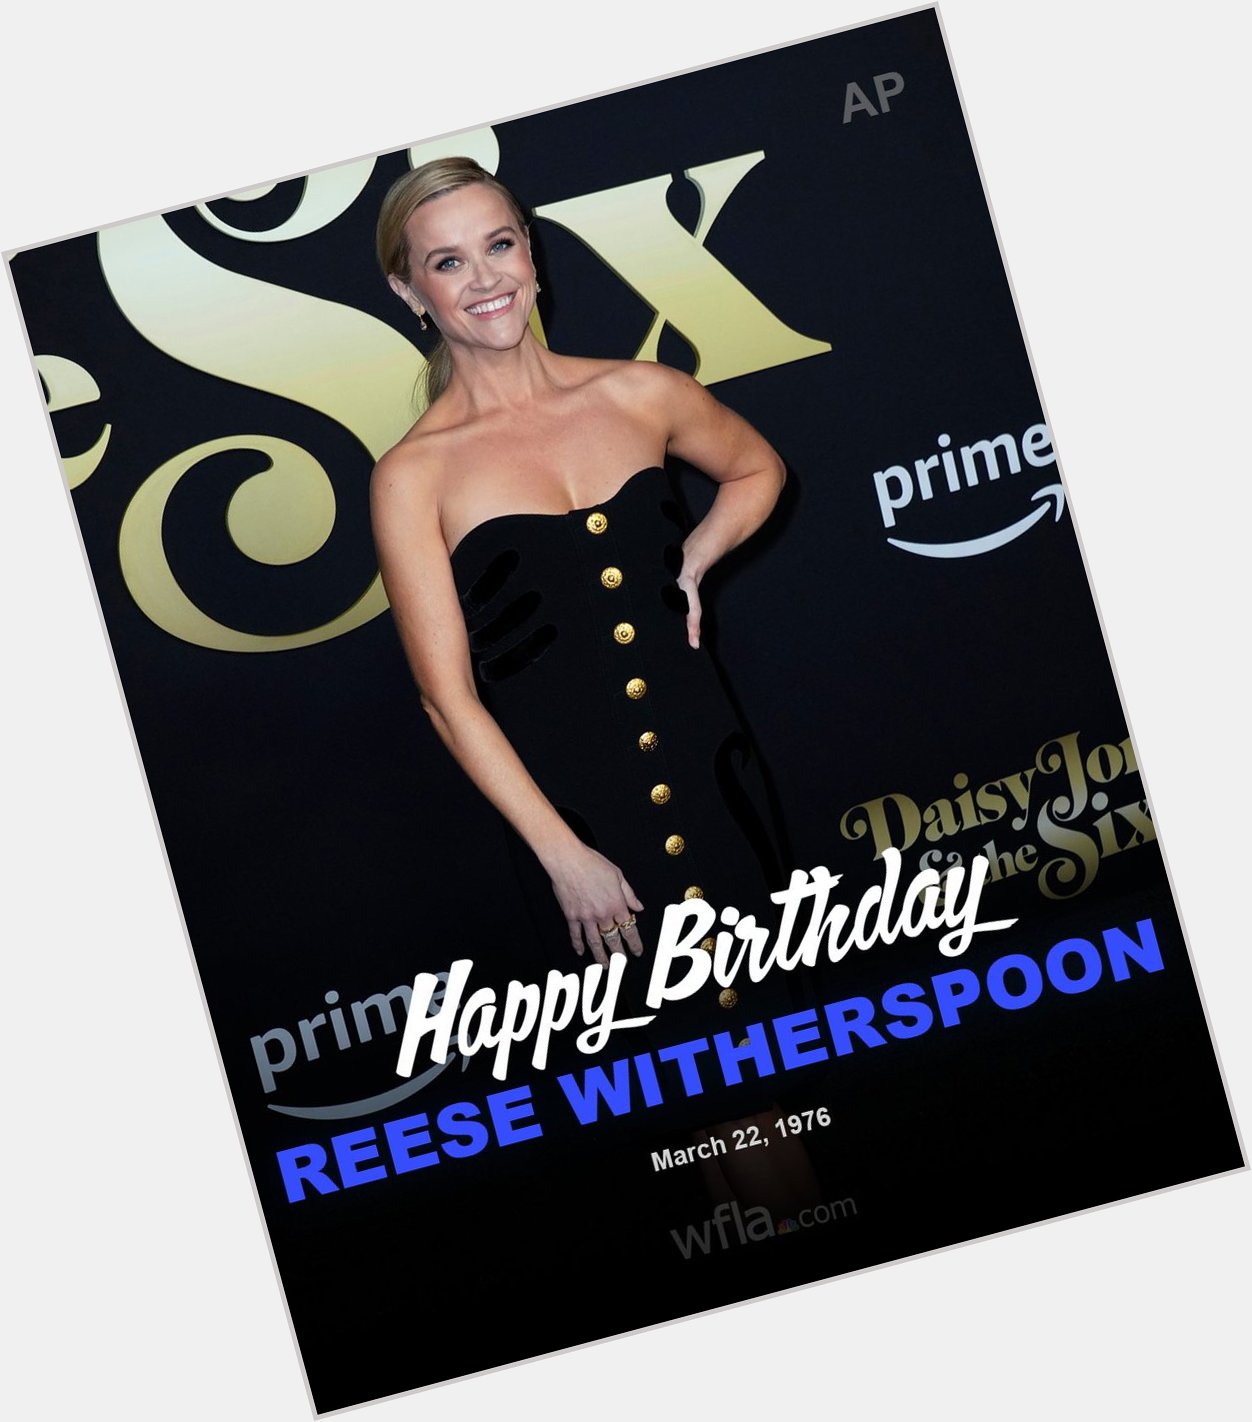 HAPPY BIRTHDAY, REESE WITHERSPOON! The Academy Award-winning actress turns 47 today!  